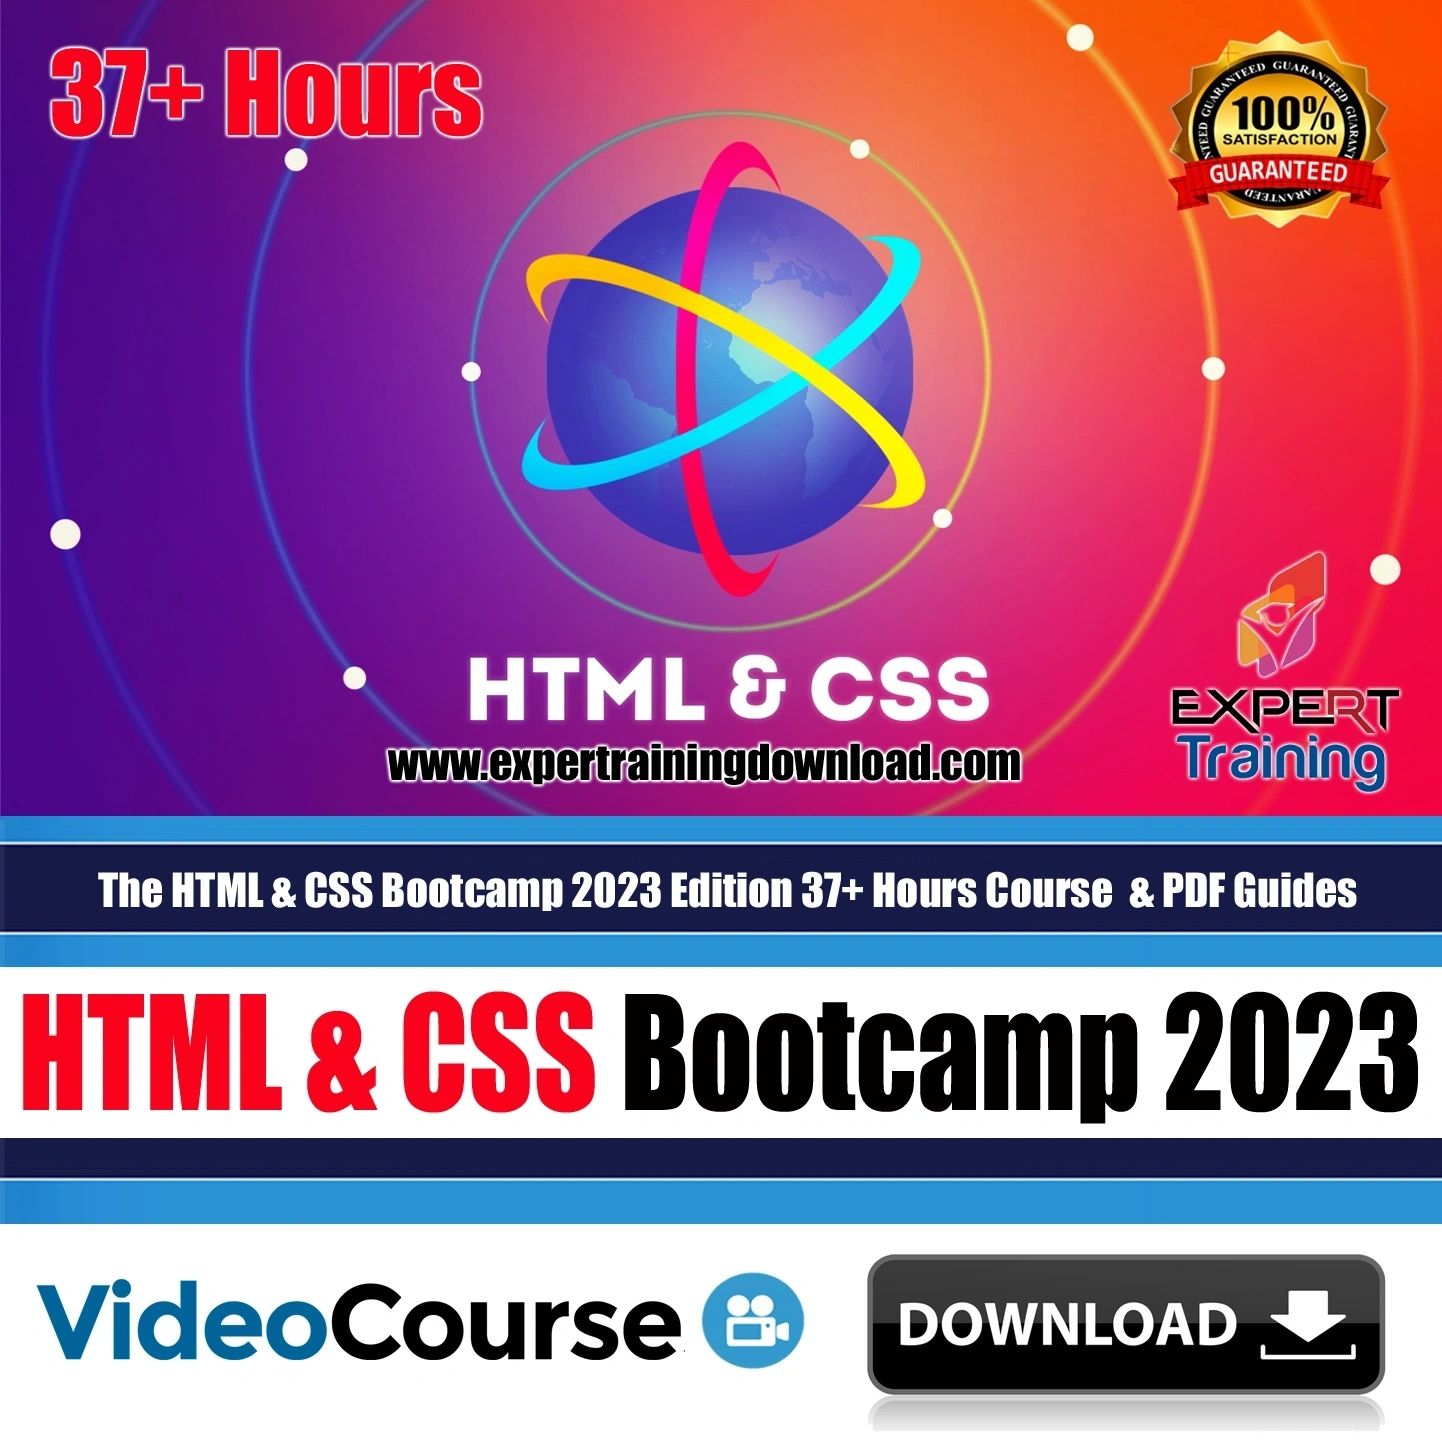 The HTML & CSS Bootcamp 2023 Edition 37+ Hours Course & PDF Guides